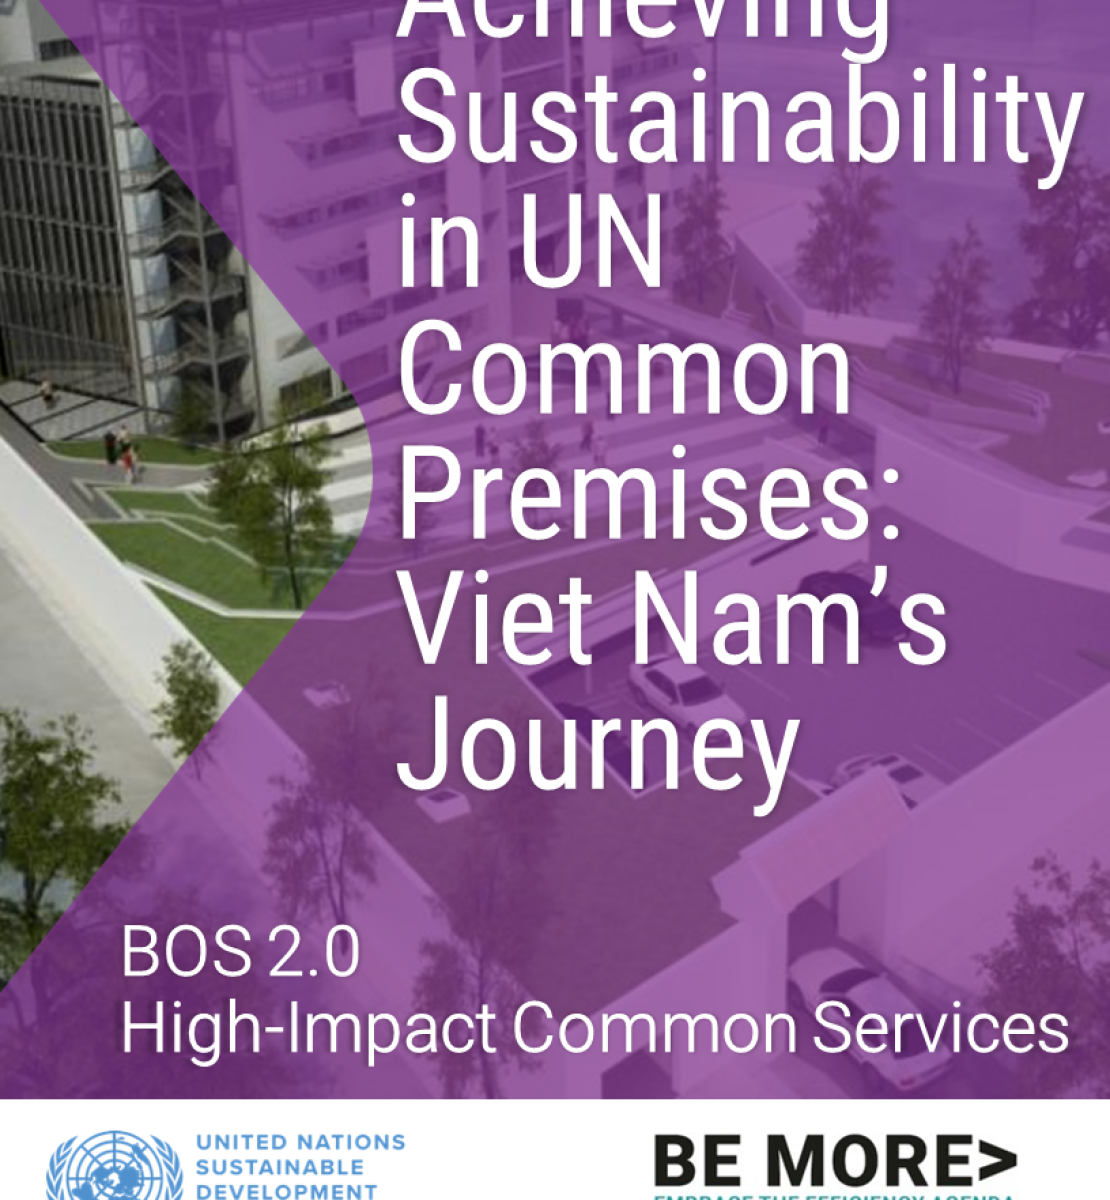 Cover picture with Viet Nam's Green One UN House logos of UNSDG and Efficiency Agenda